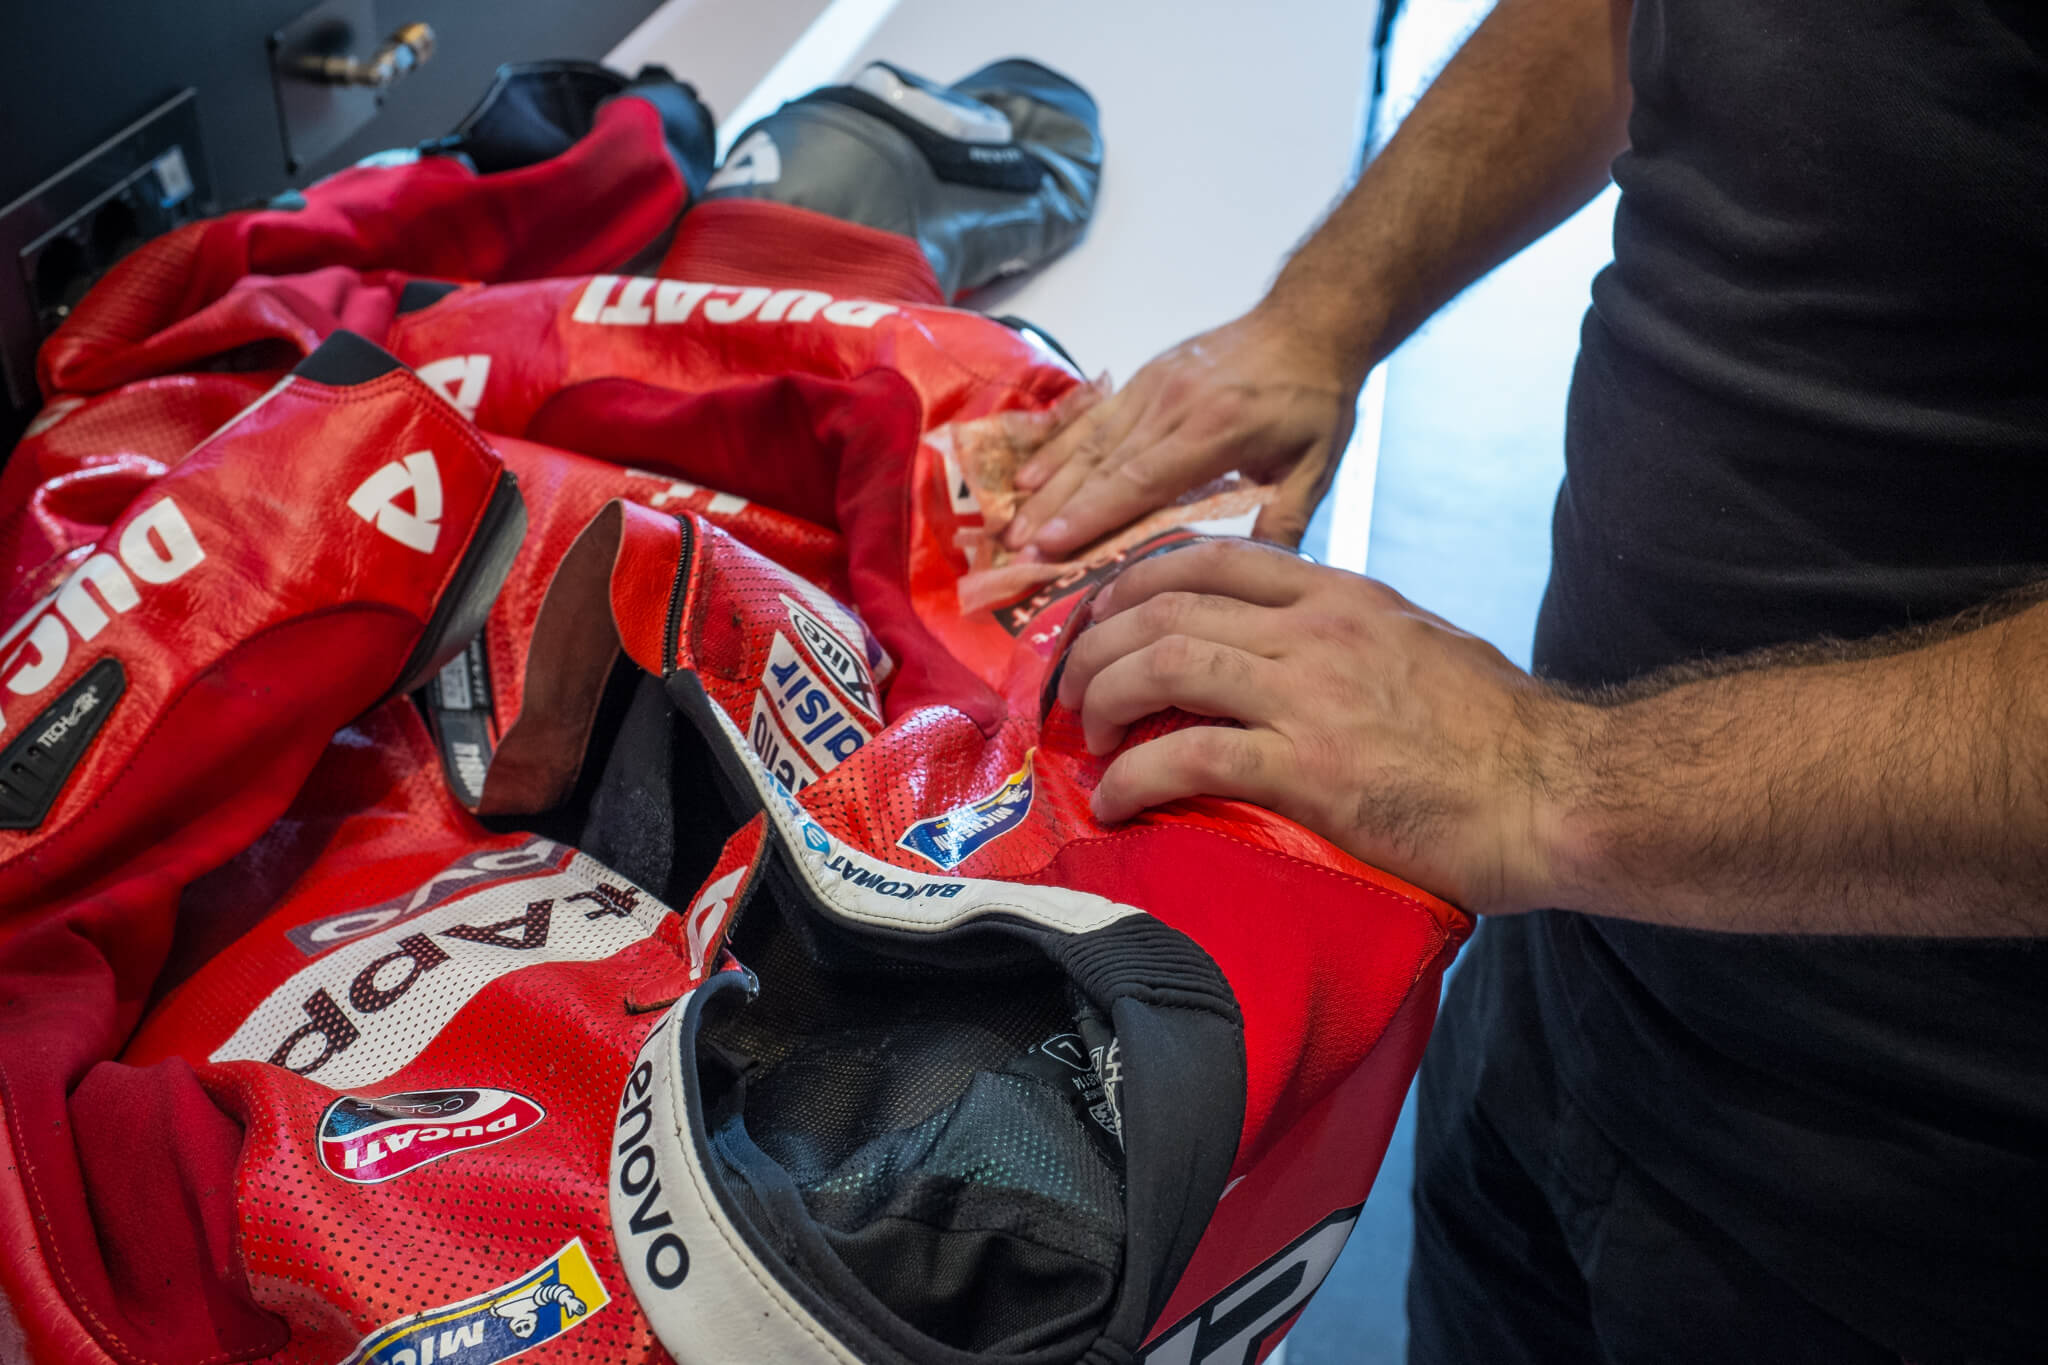 Cleaning all dirt and removing all flies from Petrucci's suit